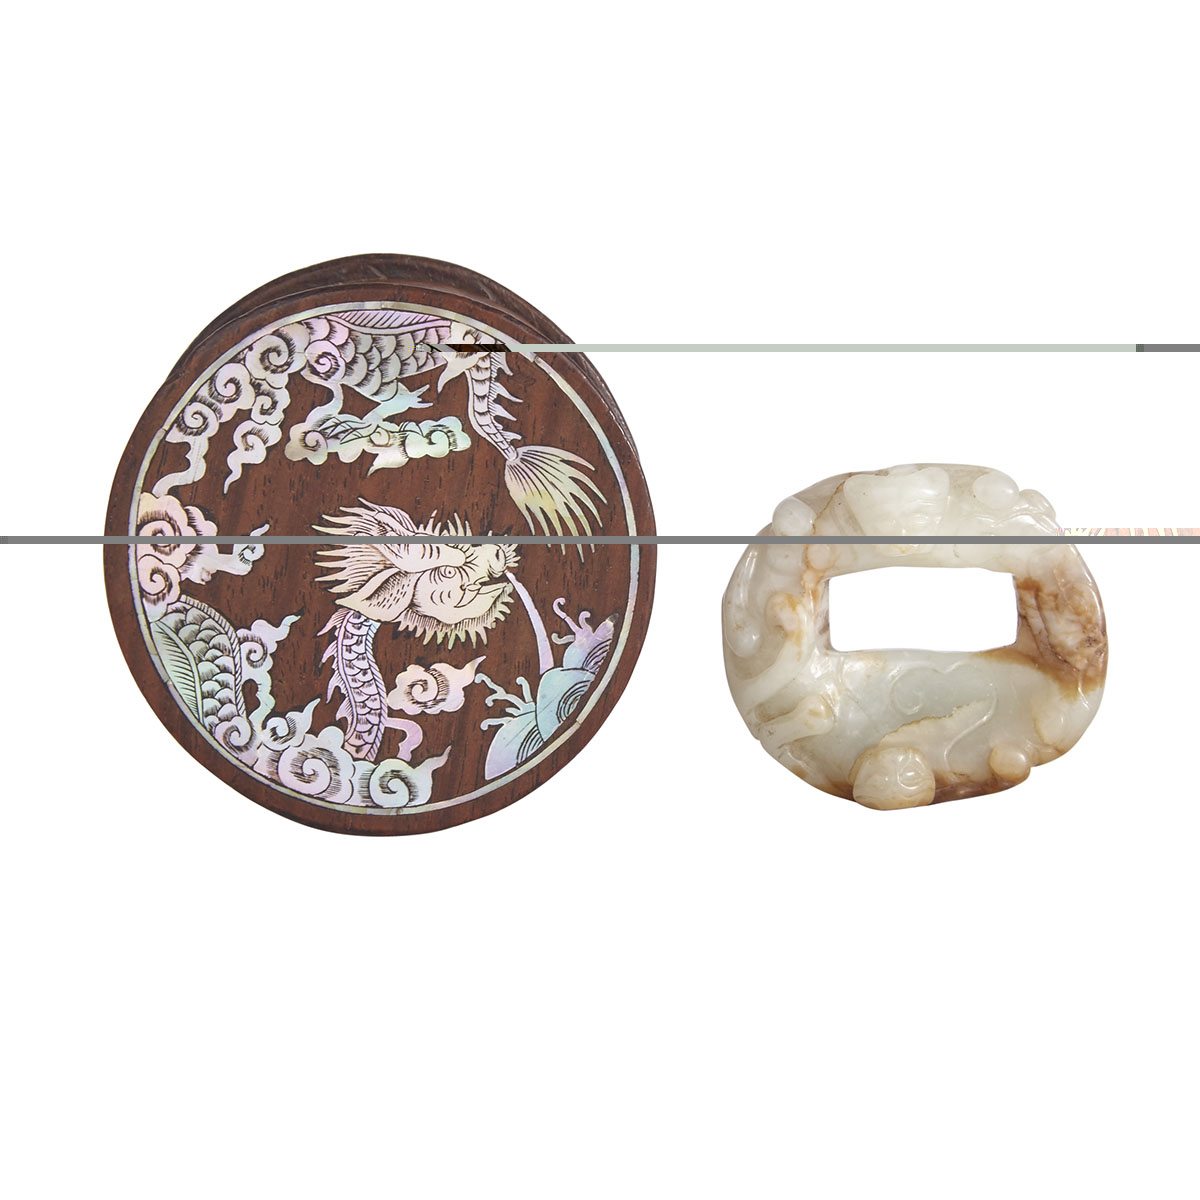 Huanghuali Mother-of Pearl Inlaid Box with Celadon Russet Chilong Jade Pendant, Song to Ming Dynasty (Box Late 19th Century)